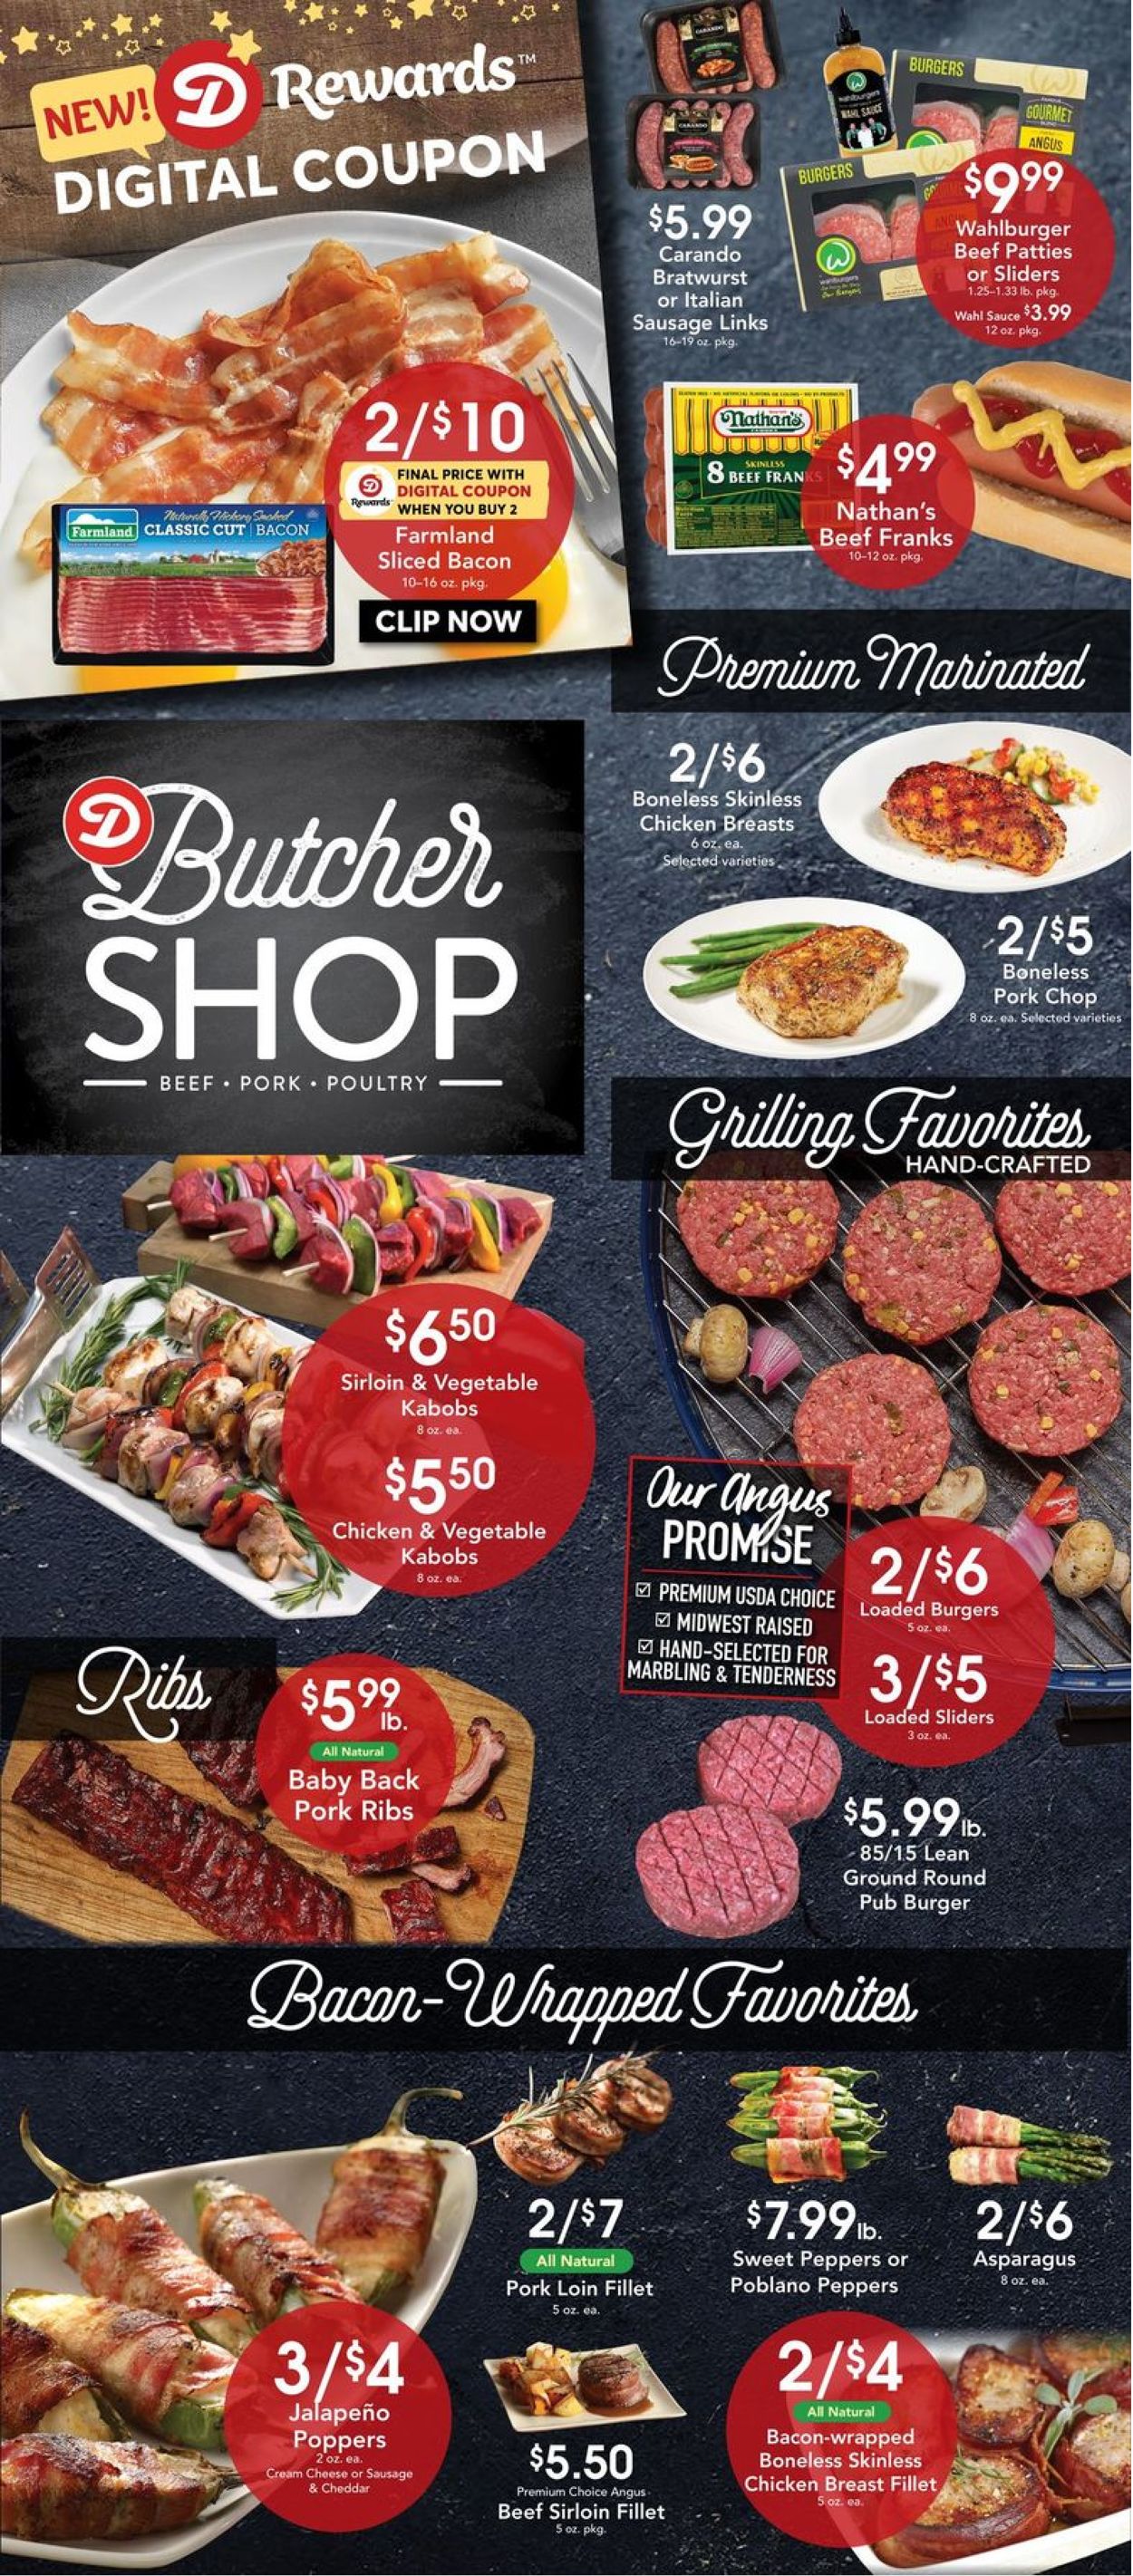 Dierbergs Ad from 06/14/2022